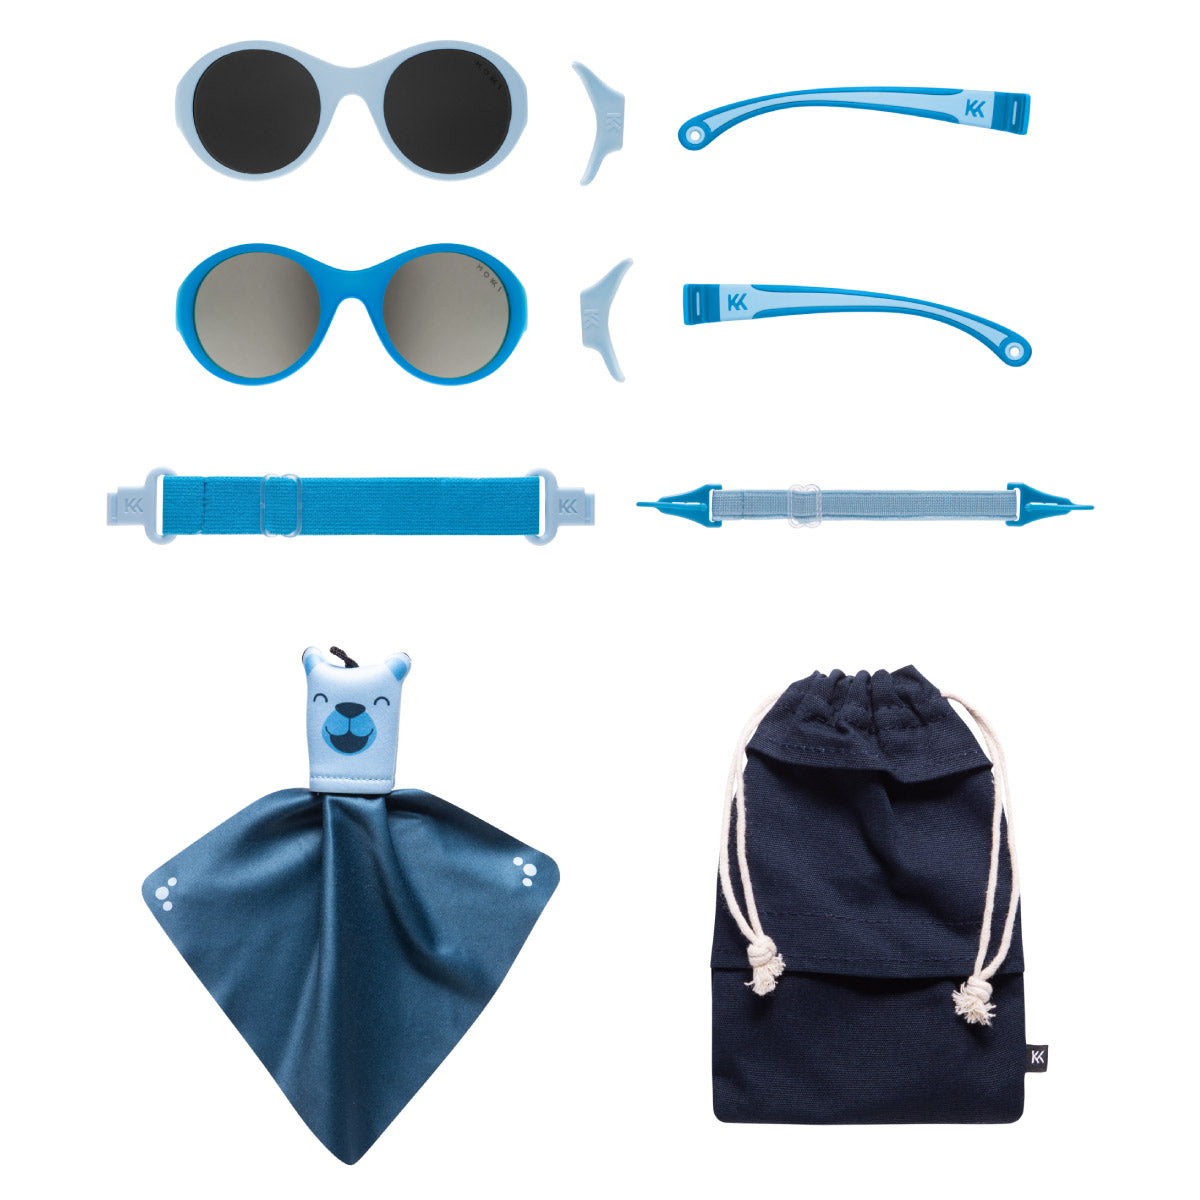 Click & Change sunglasses for kids in blue